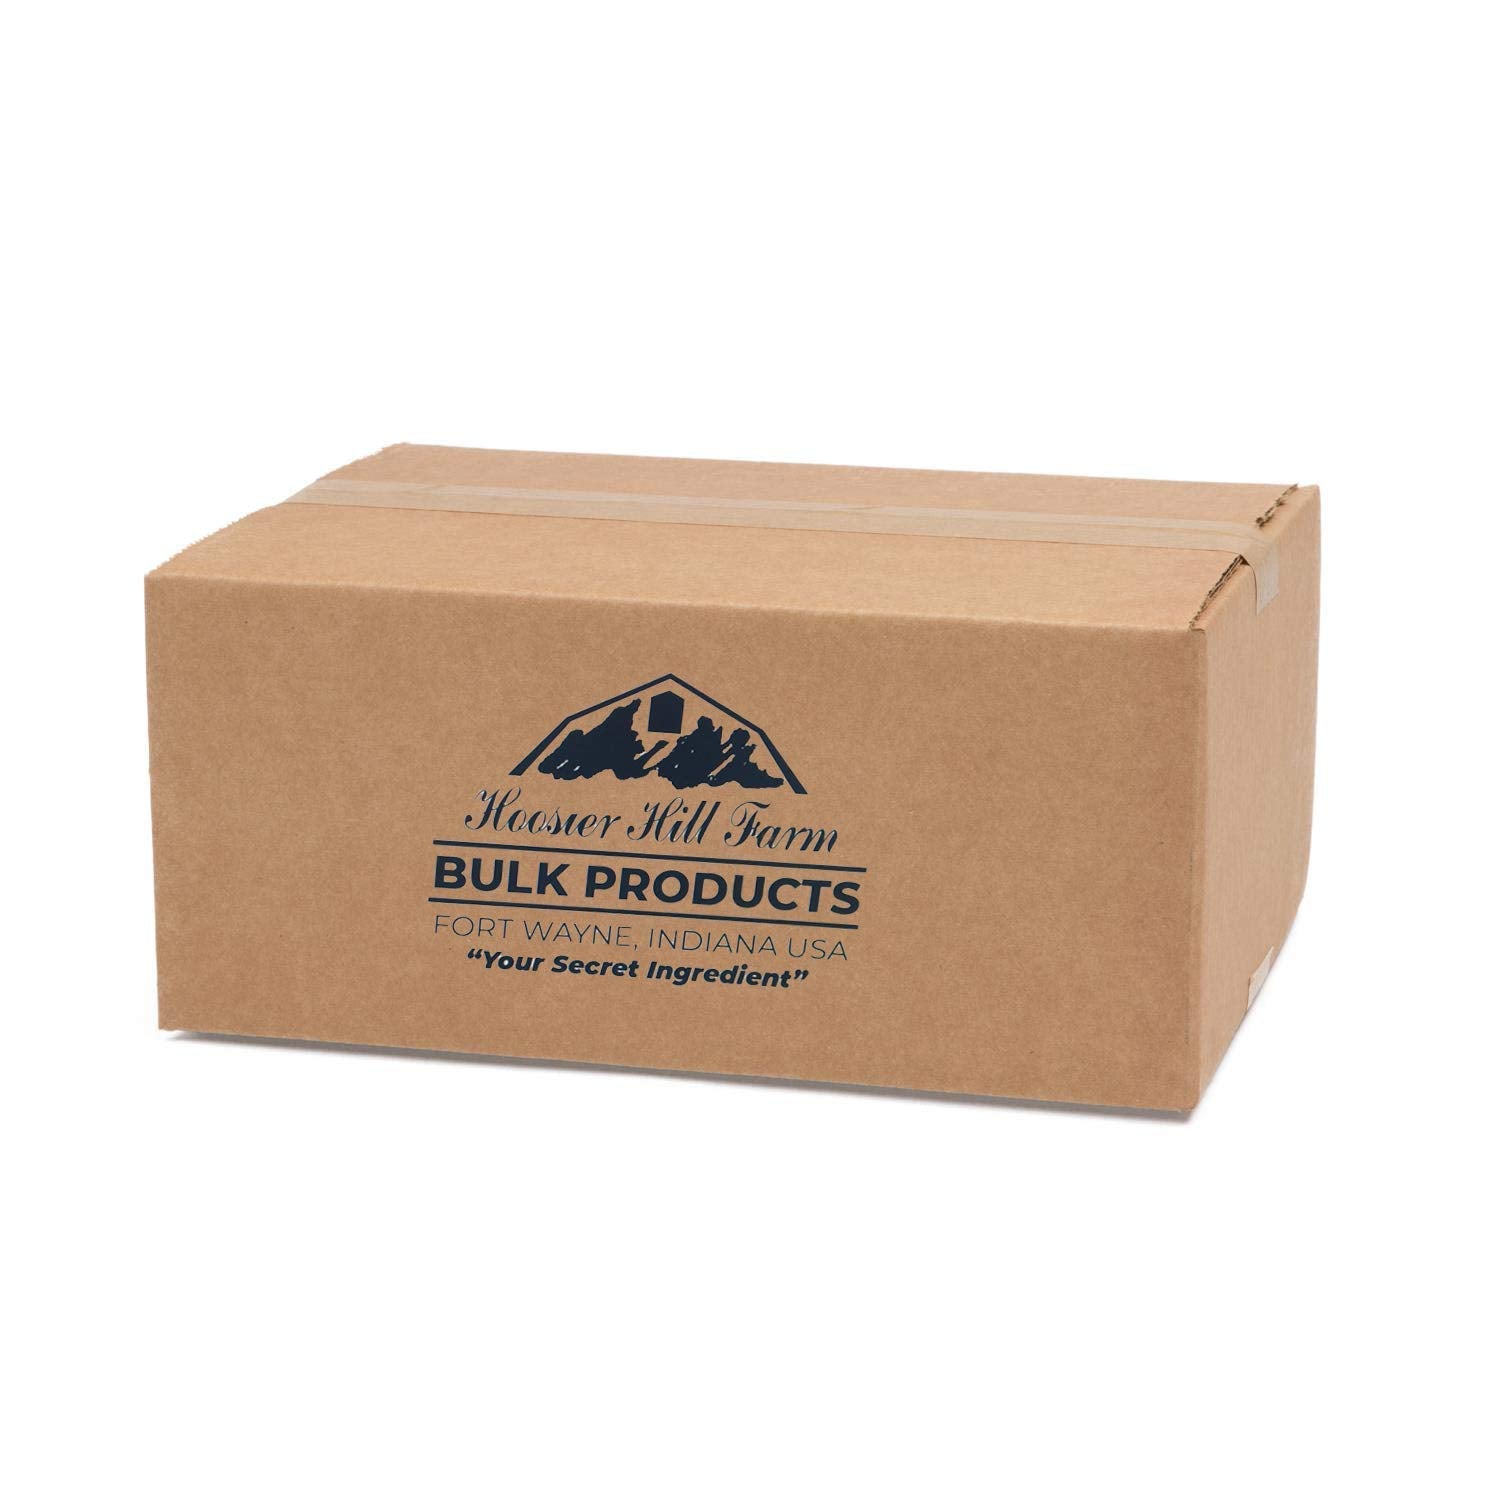 Oat Milk Powder by Hoosier Hill Farm, 25LB BULK Bag (Pack of 1). Made in USA with no additives